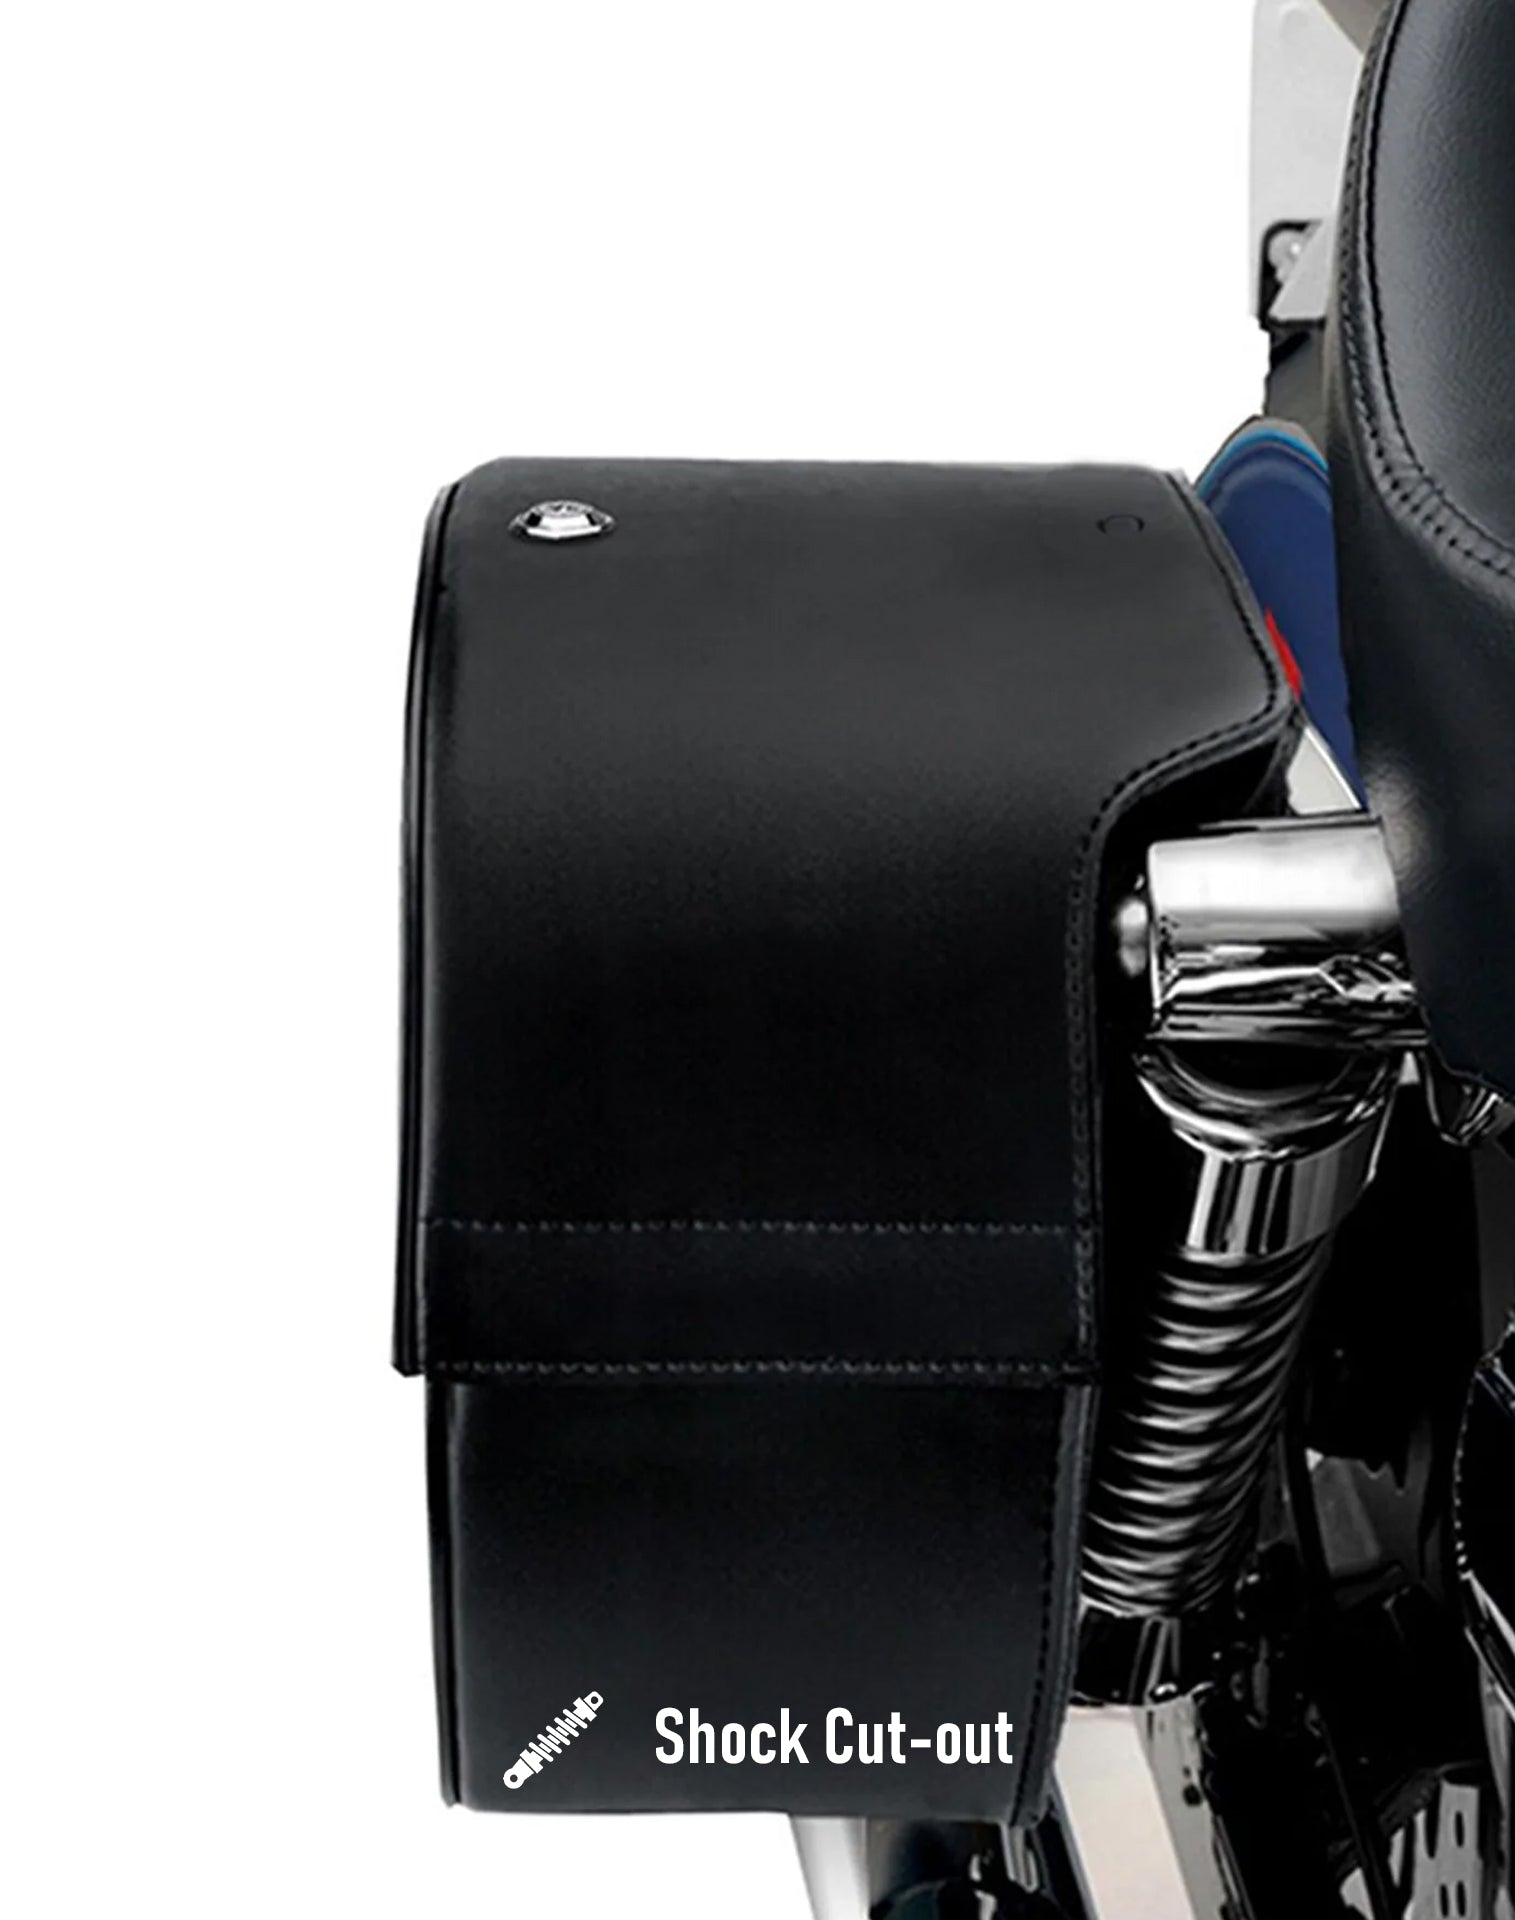 Viking Vintage Large Shock Cut Out Leather Motorcycle Saddlebags For Harley Sportster 1200 Low Xl1200L Hard Shell Construction